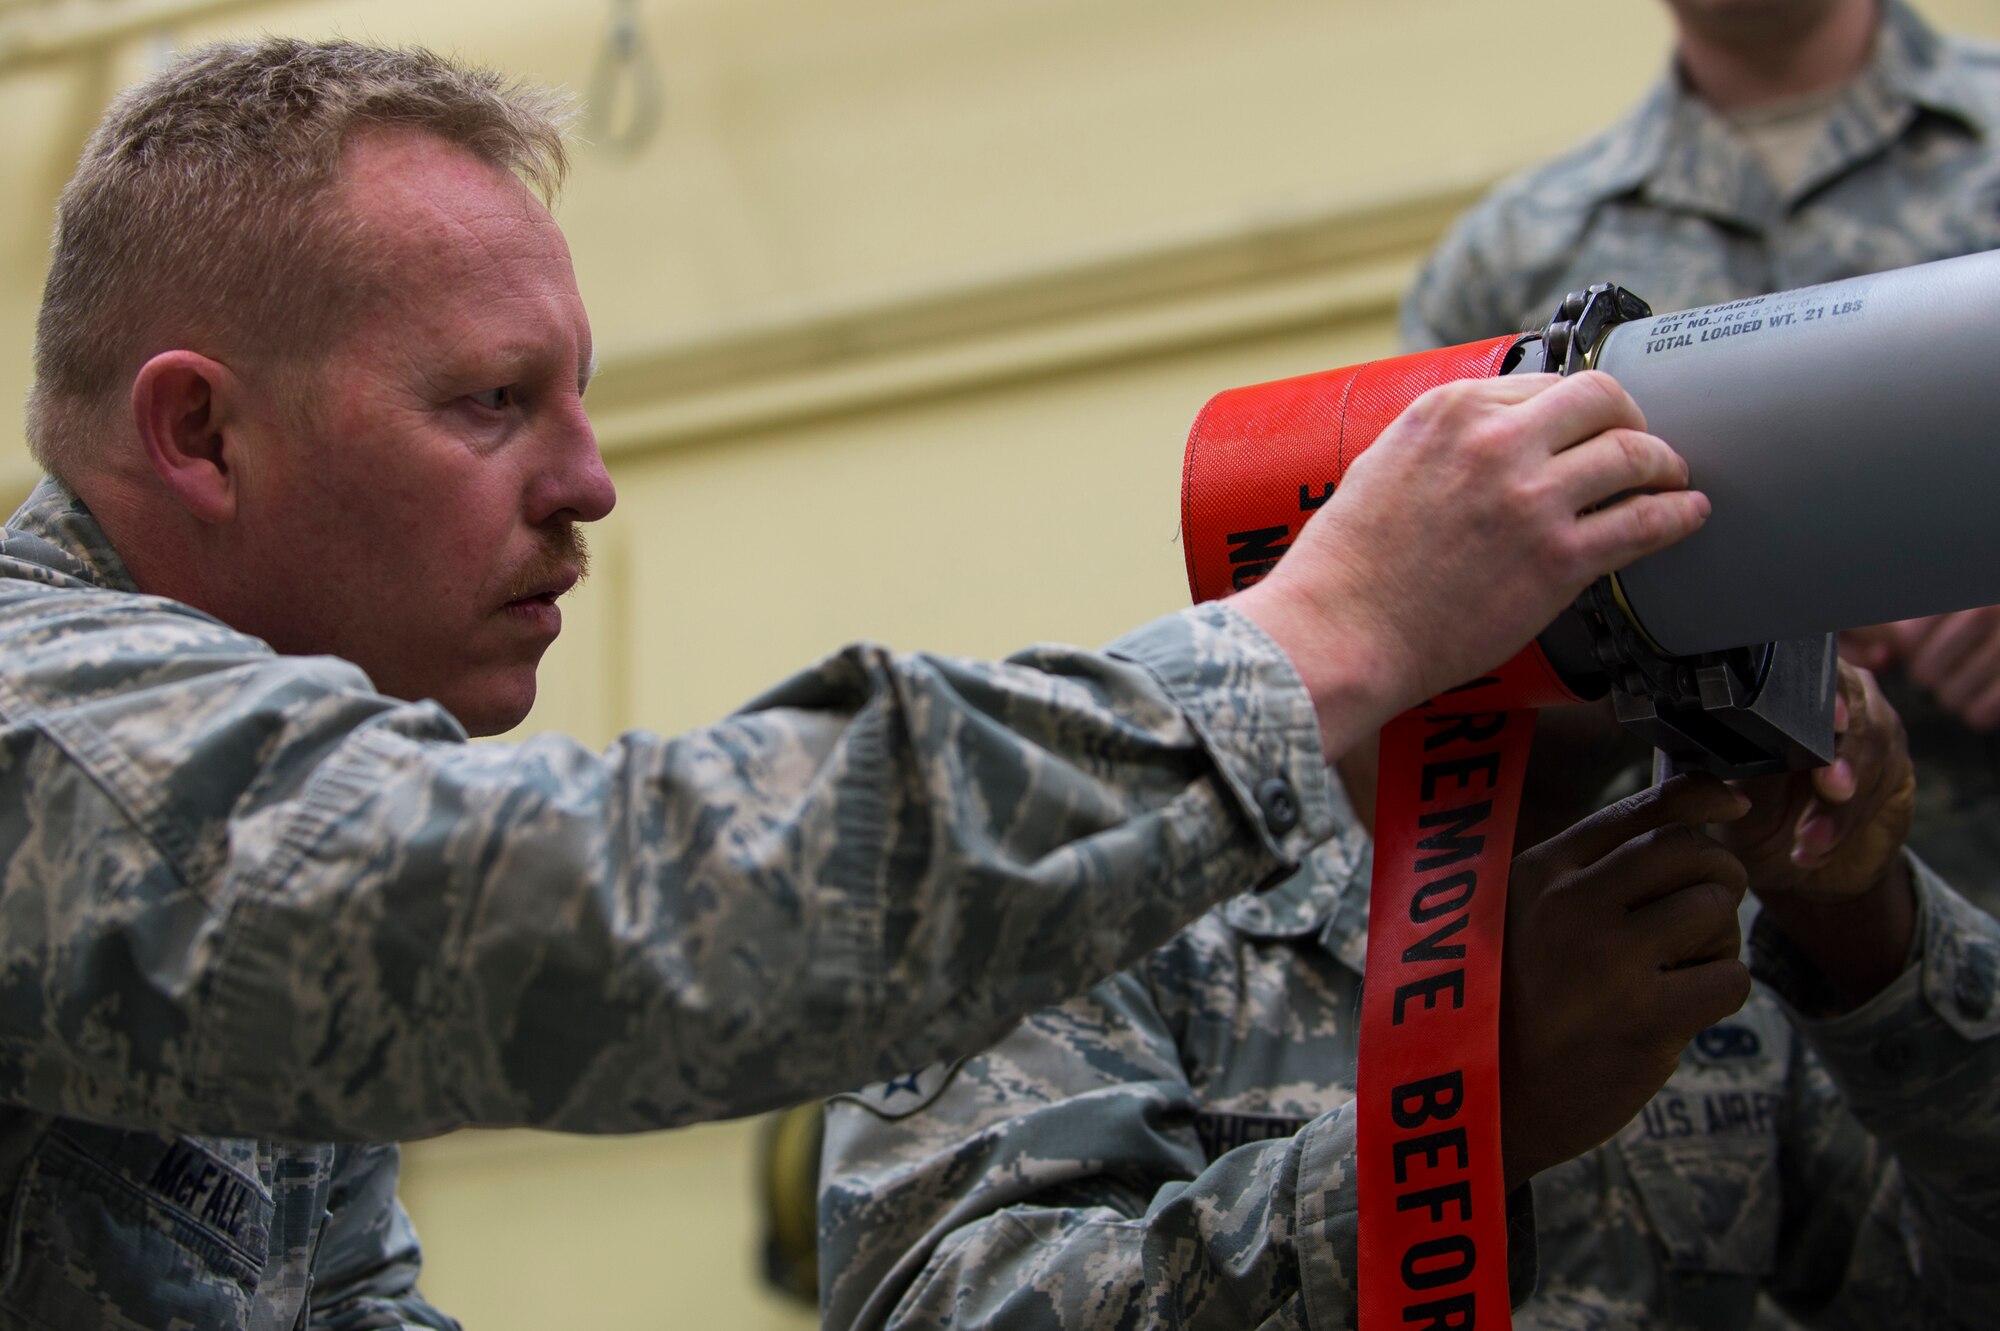 U.S. Air Force Col. Joseph McFall, 52nd Fighter Wing commander, secures components to an Air Intercept Missile 9 at during a Saber leadership “out and about” event Spangdahlem Air Base, Germany, March 27, 2017. The leadership team visited the 52nd Maintenance Squadron munitions section to learn the basics of munitions building and how pilots use them during flight. (U.S. Air Force photo by Senior Airman Dawn M. Weber)